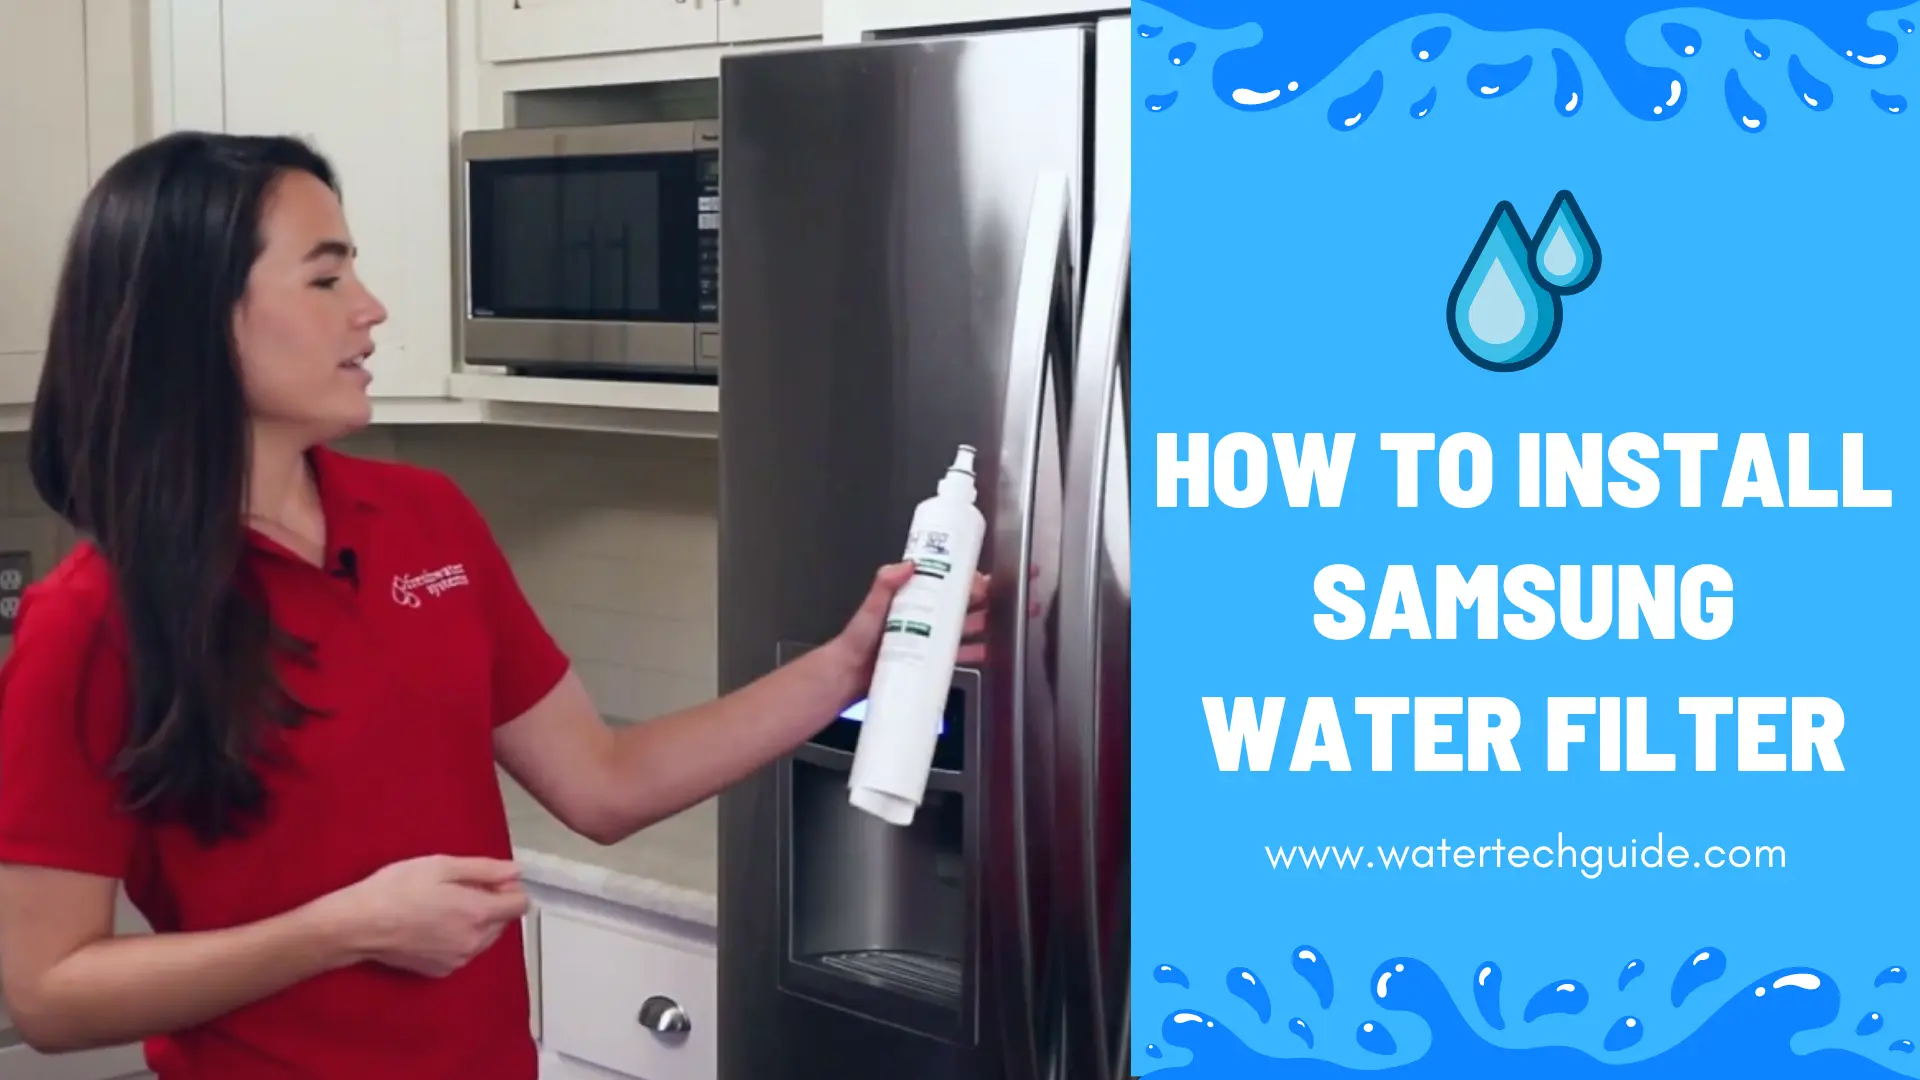 How To Install Samsung Water Filter